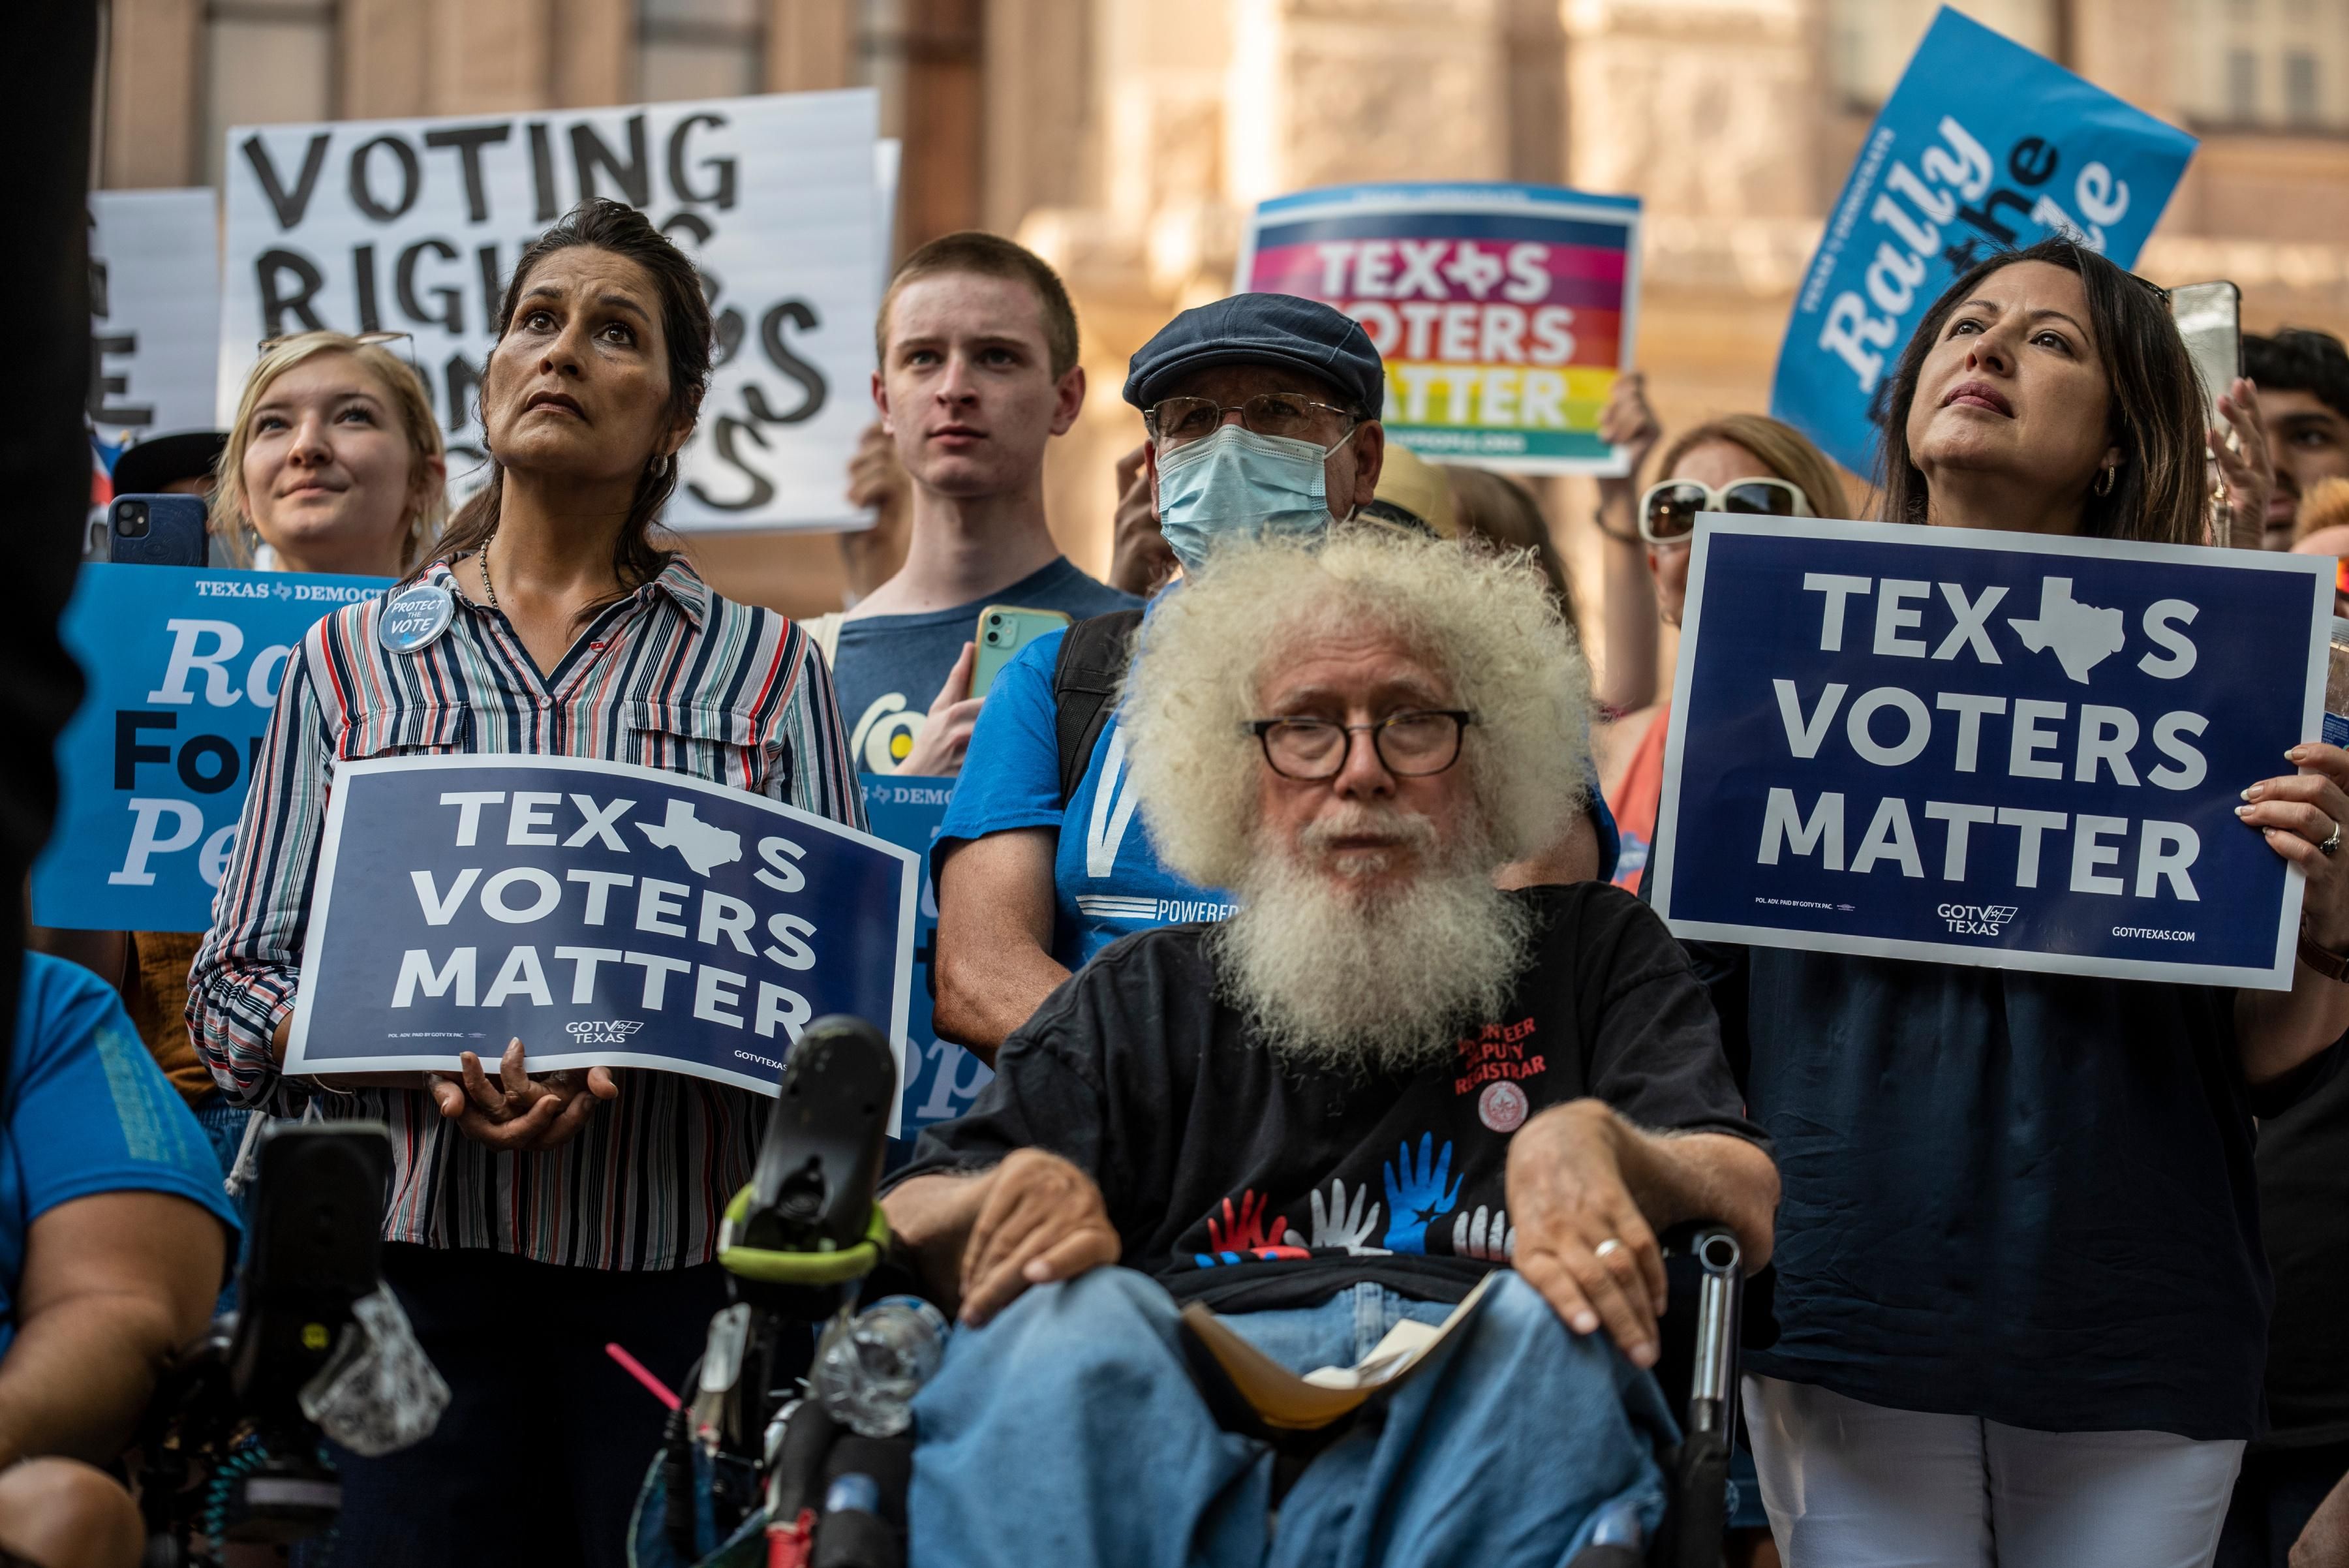 Texas voters rally at the state capital